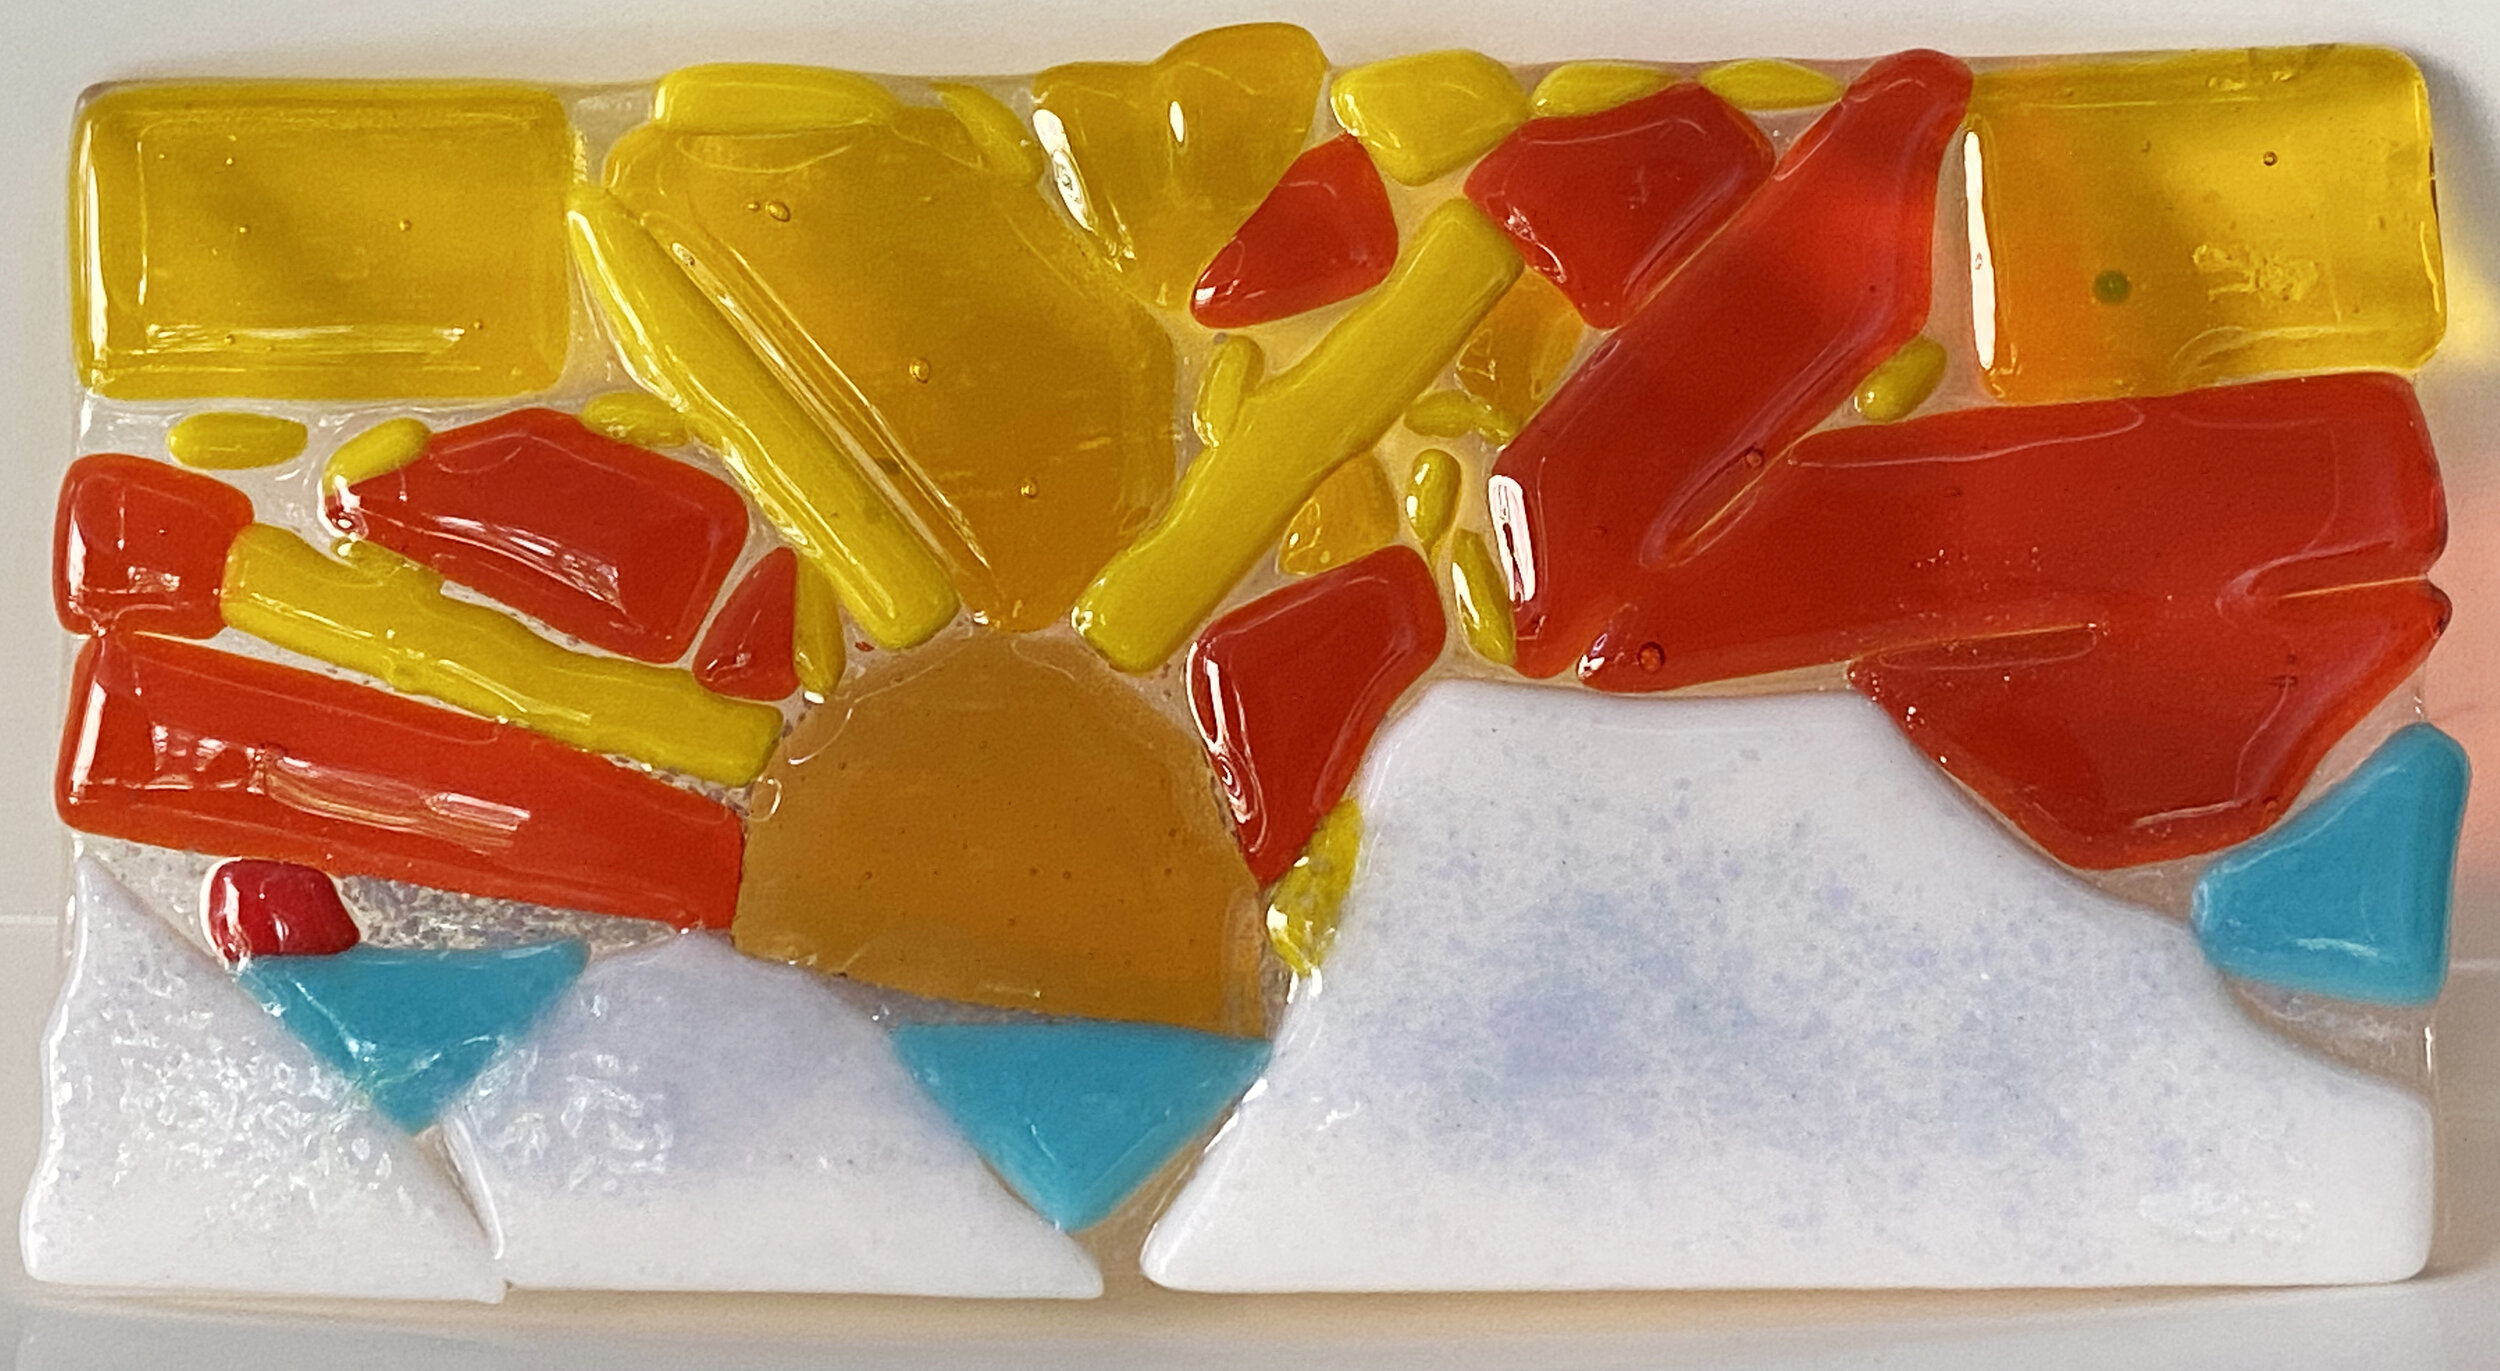  Fused glass, from Losing Winter workshop 